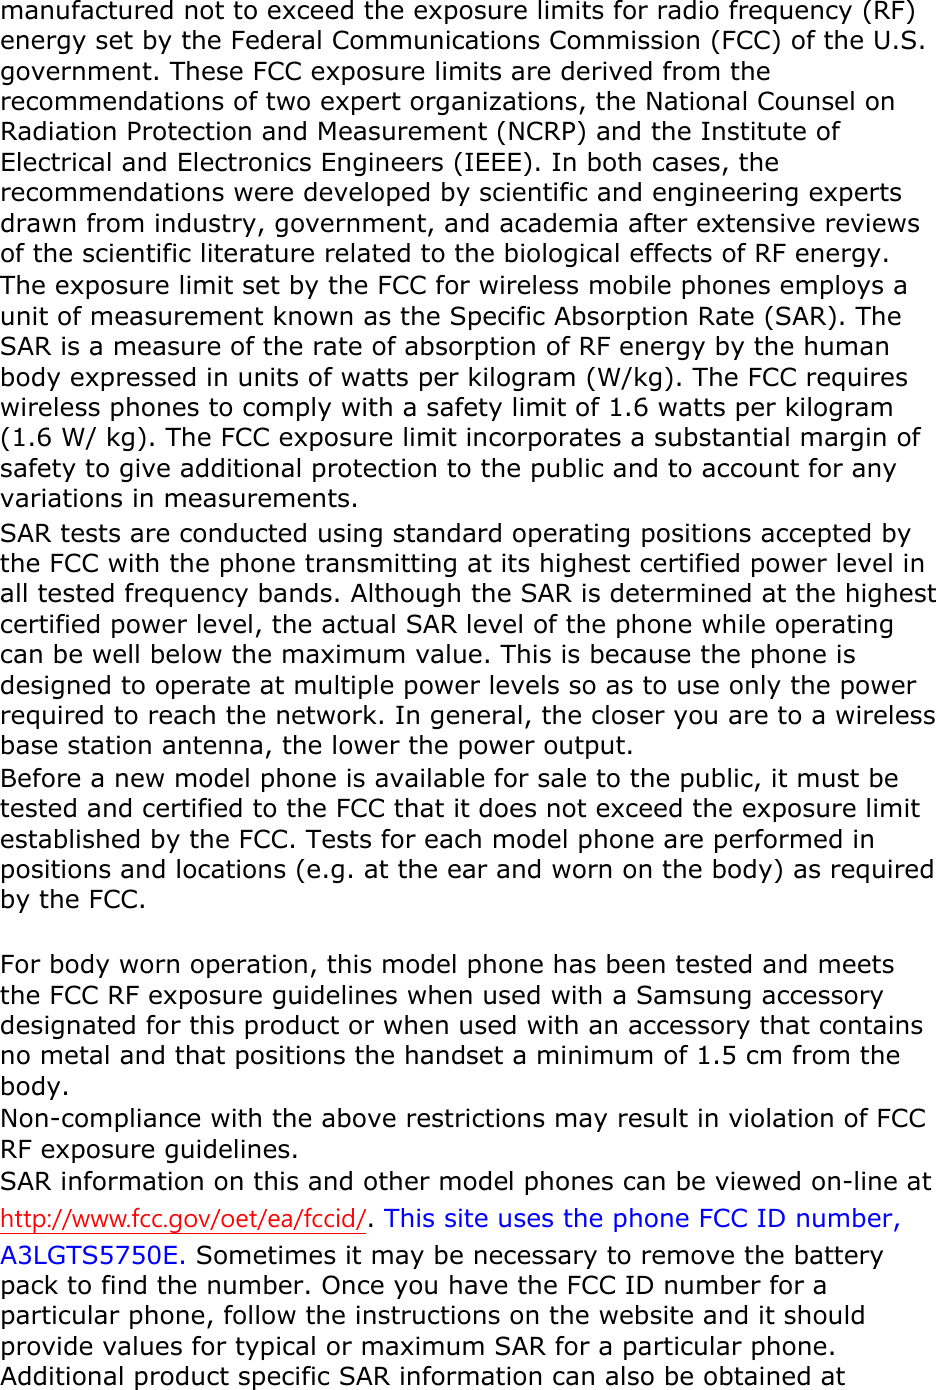 manufactured not to exceed the exposure limits for radio frequency (RF) energy set by the Federal Communications Commission (FCC) of the U.S. government. These FCC exposure limits are derived from the recommendations of two expert organizations, the National Counsel on Radiation Protection and Measurement (NCRP) and the Institute of Electrical and Electronics Engineers (IEEE). In both cases, the recommendations were developed by scientific and engineering experts drawn from industry, government, and academia after extensive reviews of the scientific literature related to the biological effects of RF energy. The exposure limit set by the FCC for wireless mobile phones employs a unit of measurement known as the Specific Absorption Rate (SAR). The SAR is a measure of the rate of absorption of RF energy by the human body expressed in units of watts per kilogram (W/kg). The FCC requires wireless phones to comply with a safety limit of 1.6 watts per kilogram (1.6 W/ kg). The FCC exposure limit incorporates a substantial margin of safety to give additional protection to the public and to account for any variations in measurements. SAR tests are conducted using standard operating positions accepted by the FCC with the phone transmitting at its highest certified power level in all tested frequency bands. Although the SAR is determined at the highest certified power level, the actual SAR level of the phone while operating can be well below the maximum value. This is because the phone is designed to operate at multiple power levels so as to use only the power required to reach the network. In general, the closer you are to a wireless base station antenna, the lower the power output. Before a new model phone is available for sale to the public, it must be tested and certified to the FCC that it does not exceed the exposure limit established by the FCC. Tests for each model phone are performed in positions and locations (e.g. at the ear and worn on the body) as required by the FCC.      For body worn operation, this model phone has been tested and meets the FCC RF exposure guidelines when used with a Samsung accessory designated for this product or when used with an accessory that contains no metal and that positions the handset a minimum of 1.5 cm from the body.  Non-compliance with the above restrictions may result in violation of FCC RF exposure guidelines. SAR information on this and other model phones can be viewed on-line at http://www.fcc.gov/oet/ea/fccid/. This site uses the phone FCC ID number, A3LGTS5750E. Sometimes it may be necessary to remove the battery pack to find the number. Once you have the FCC ID number for a particular phone, follow the instructions on the website and it should provide values for typical or maximum SAR for a particular phone. Additional product specific SAR information can also be obtained at 